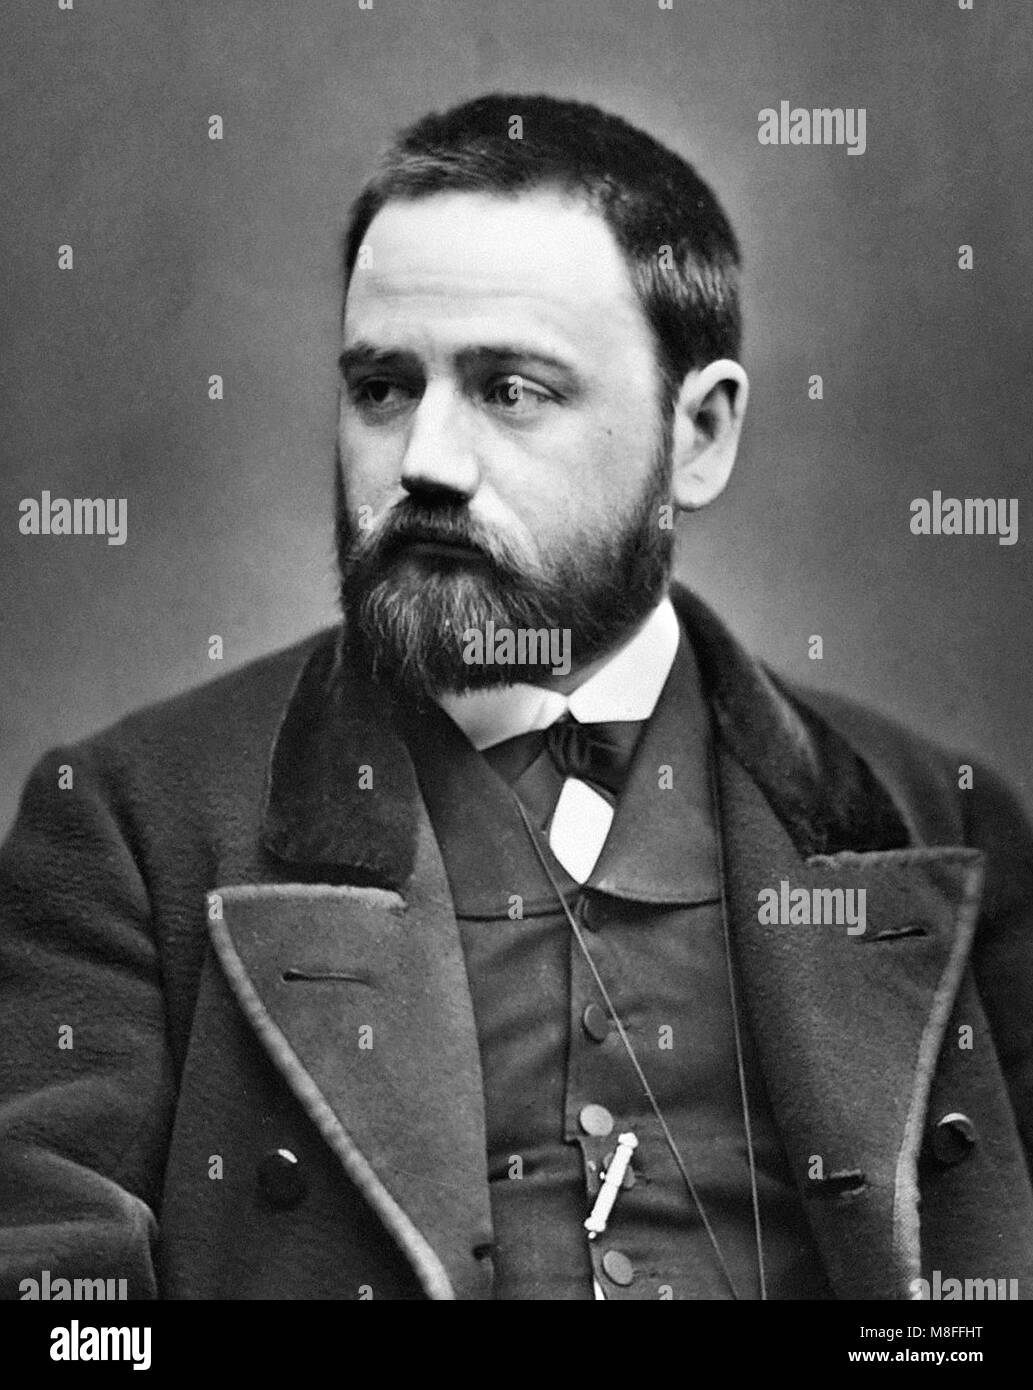 Emile Zola (1840-1902), portrait of the French author by Etienne Carjat, c.1865 Stock Photo